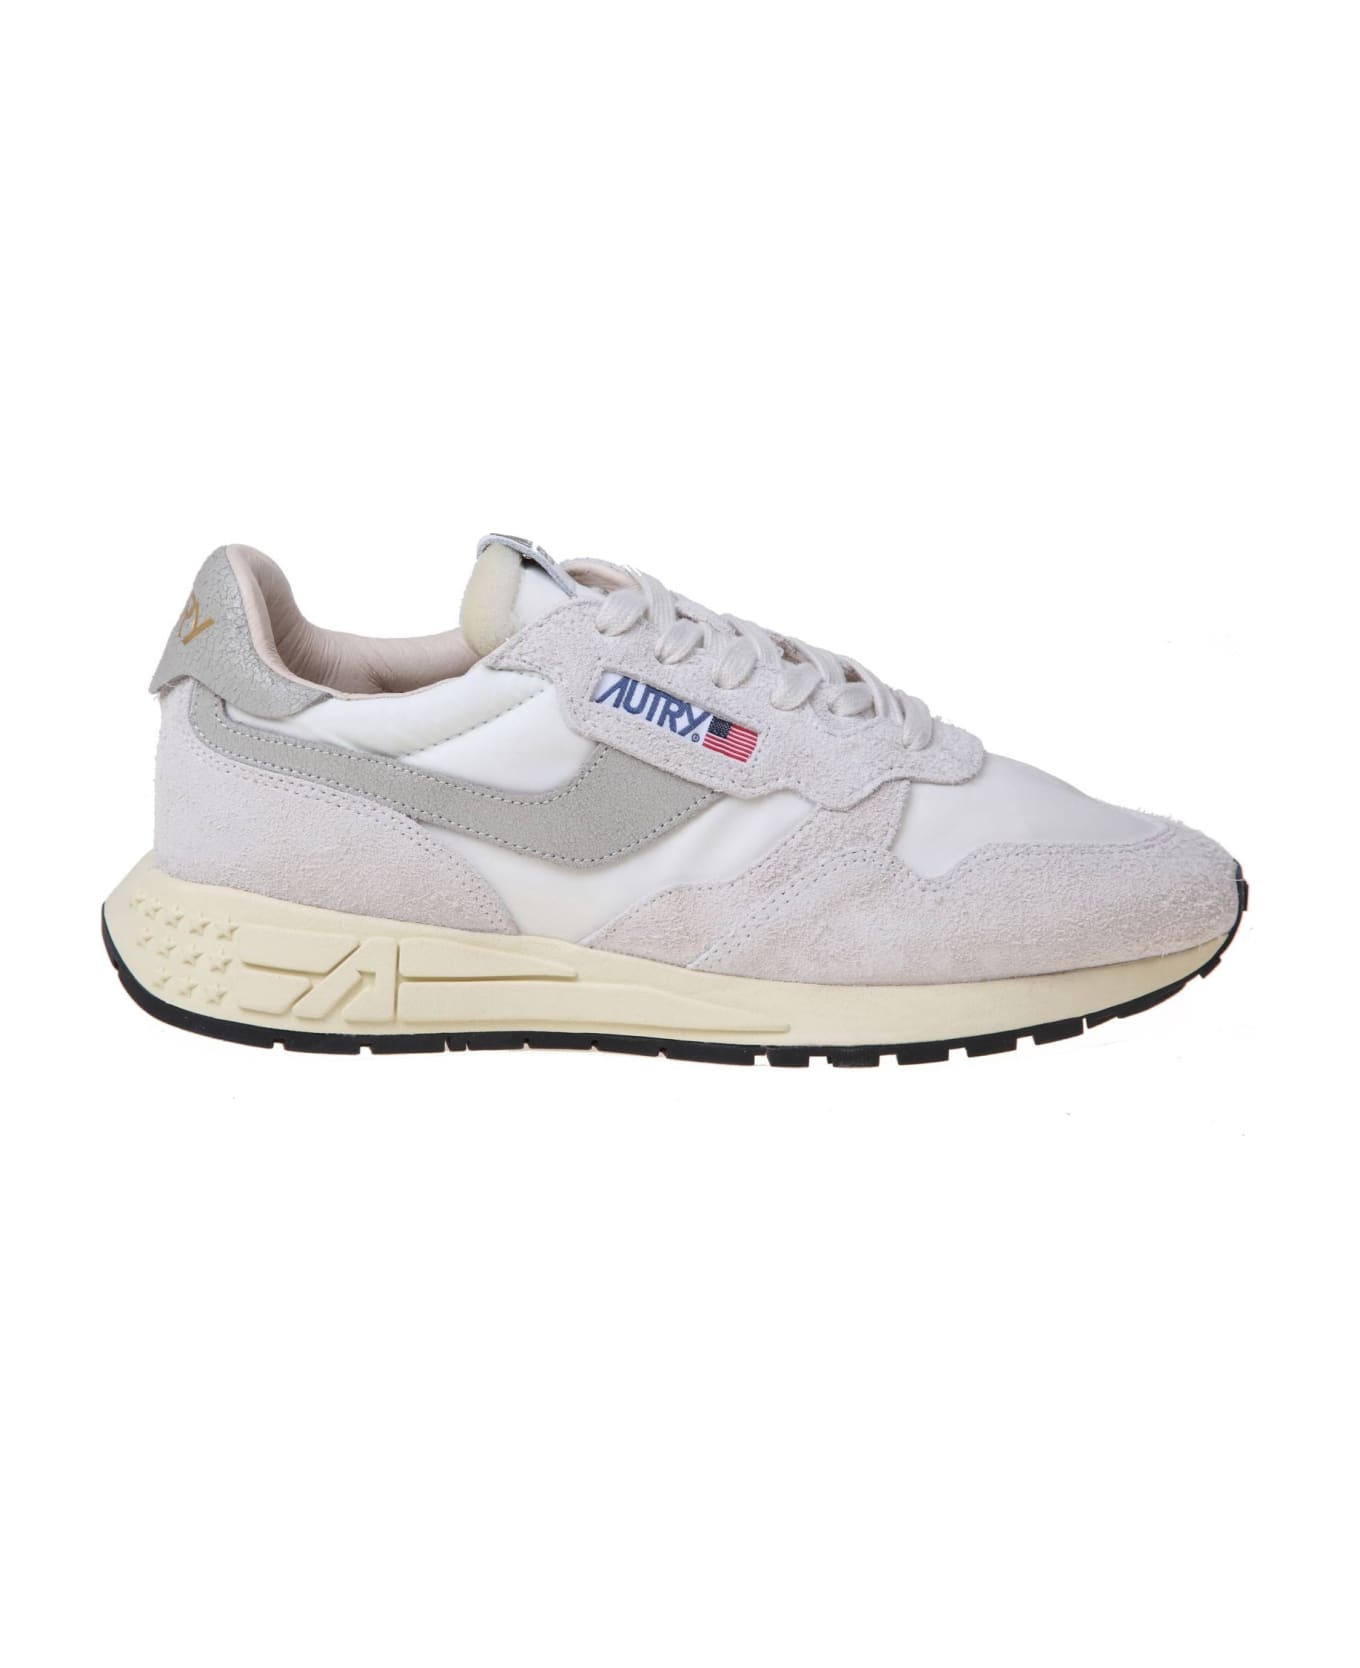 Autry Reelwind Low Sneakers In White Suede And Nylon - WHITE